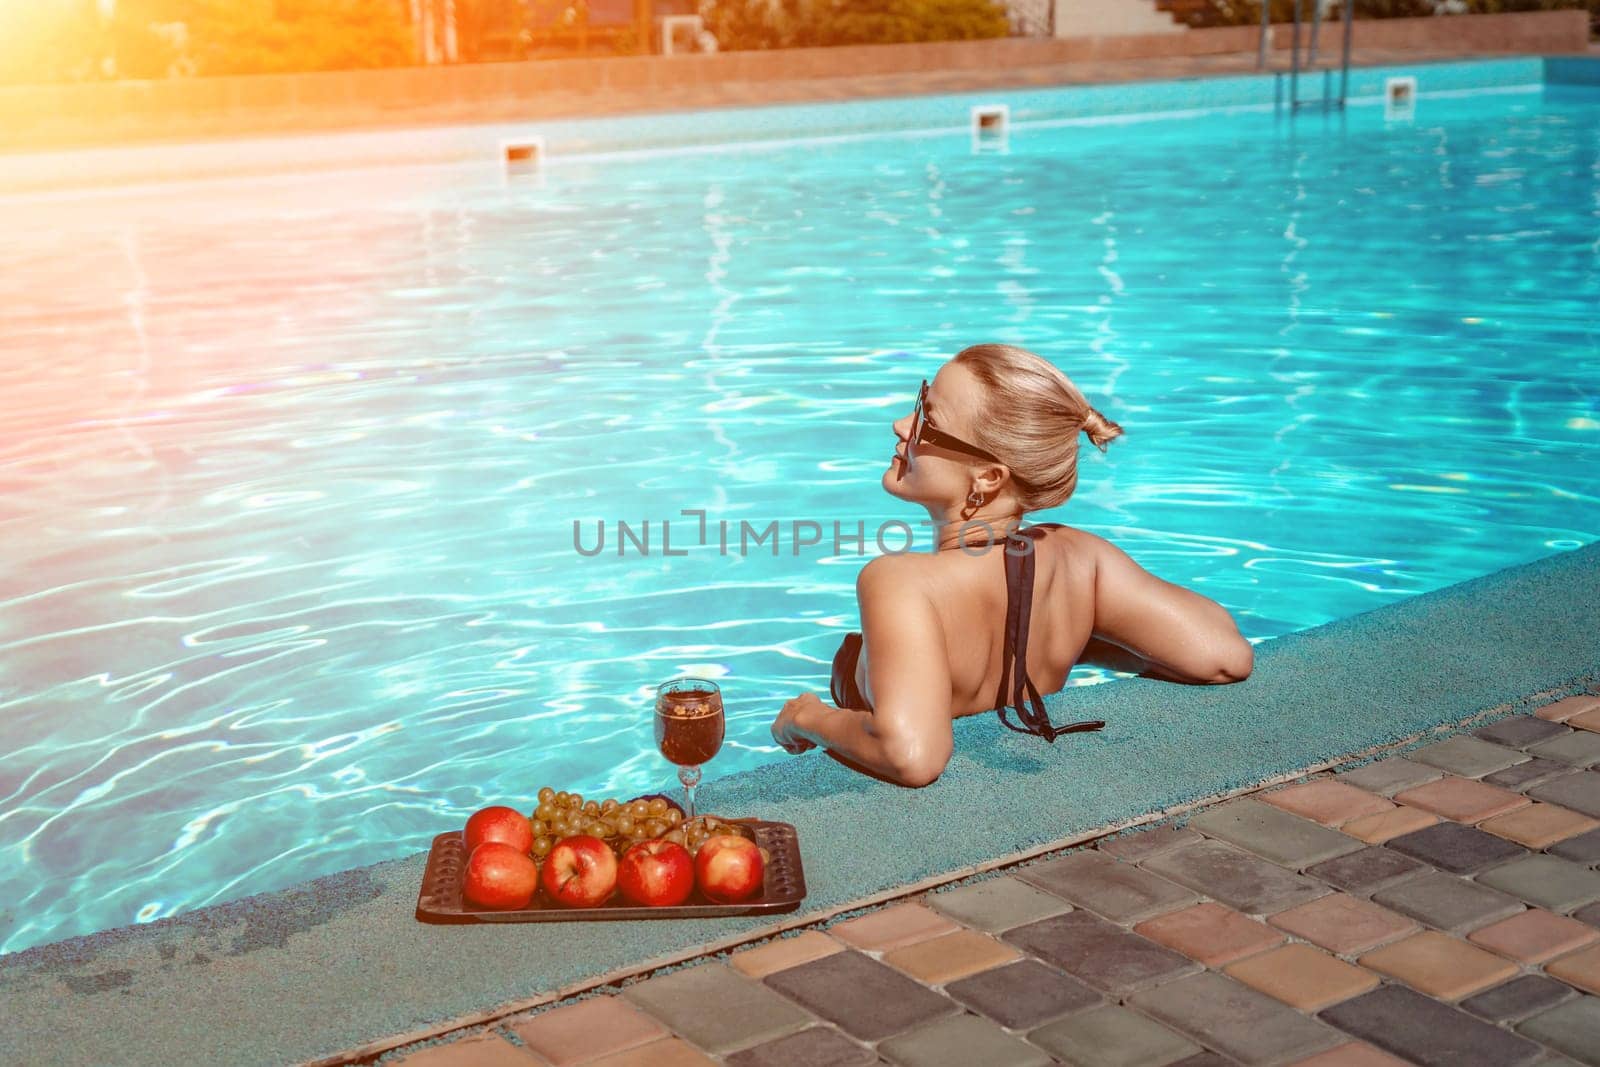 Bikini-clad woman enjoys poolside relaxation. Poolside ambiance. Capturing woman's relaxed time near pool. by Matiunina